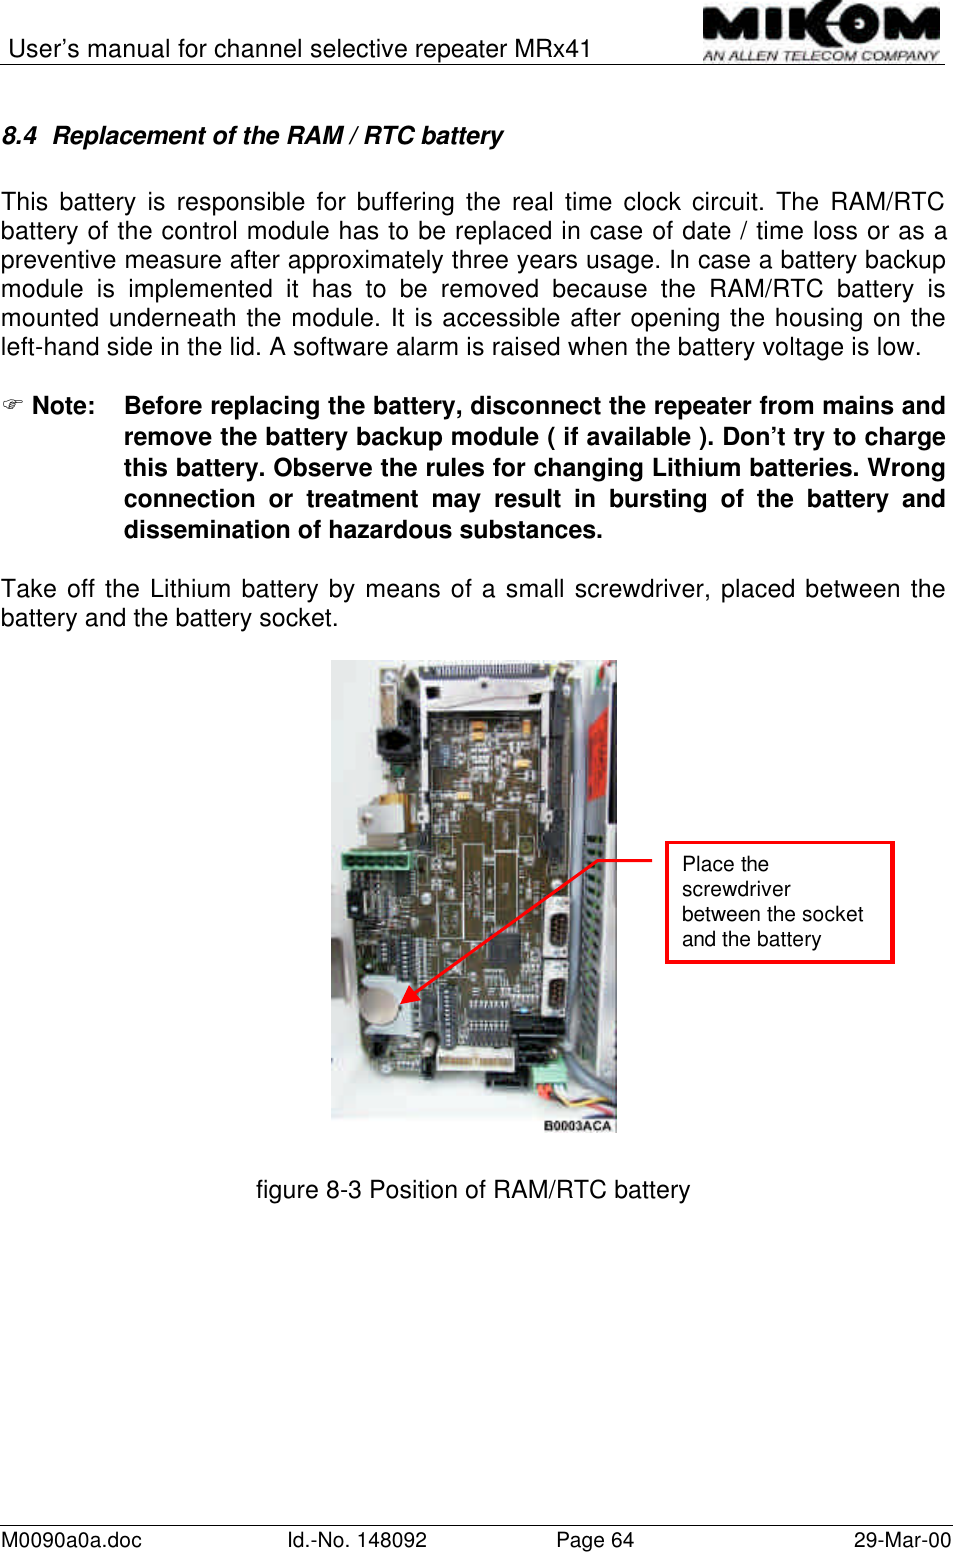 User’s manual for channel selective repeater MRx41M0090a0a.doc Id.-No. 148092 Page 64 29-Mar-008.4 Replacement of the RAM / RTC batteryThis battery is responsible for buffering the real time clock circuit. The RAM/RTCbattery of the control module has to be replaced in case of date / time loss or as apreventive measure after approximately three years usage. In case a battery backupmodule is implemented it has to be removed because the RAM/RTC battery ismounted underneath the module. It is accessible after opening the housing on theleft-hand side in the lid. A software alarm is raised when the battery voltage is low.F Note: Before replacing the battery, disconnect the repeater from mains andremove the battery backup module ( if available ). Don’t try to chargethis battery. Observe the rules for changing Lithium batteries. Wrongconnection or treatment may result in bursting of the battery anddissemination of hazardous substances.Take off the Lithium battery by means of a small screwdriver, placed between thebattery and the battery socket.figure 8-3 Position of RAM/RTC batteryPlace thescrewdriverbetween the socketand the battery